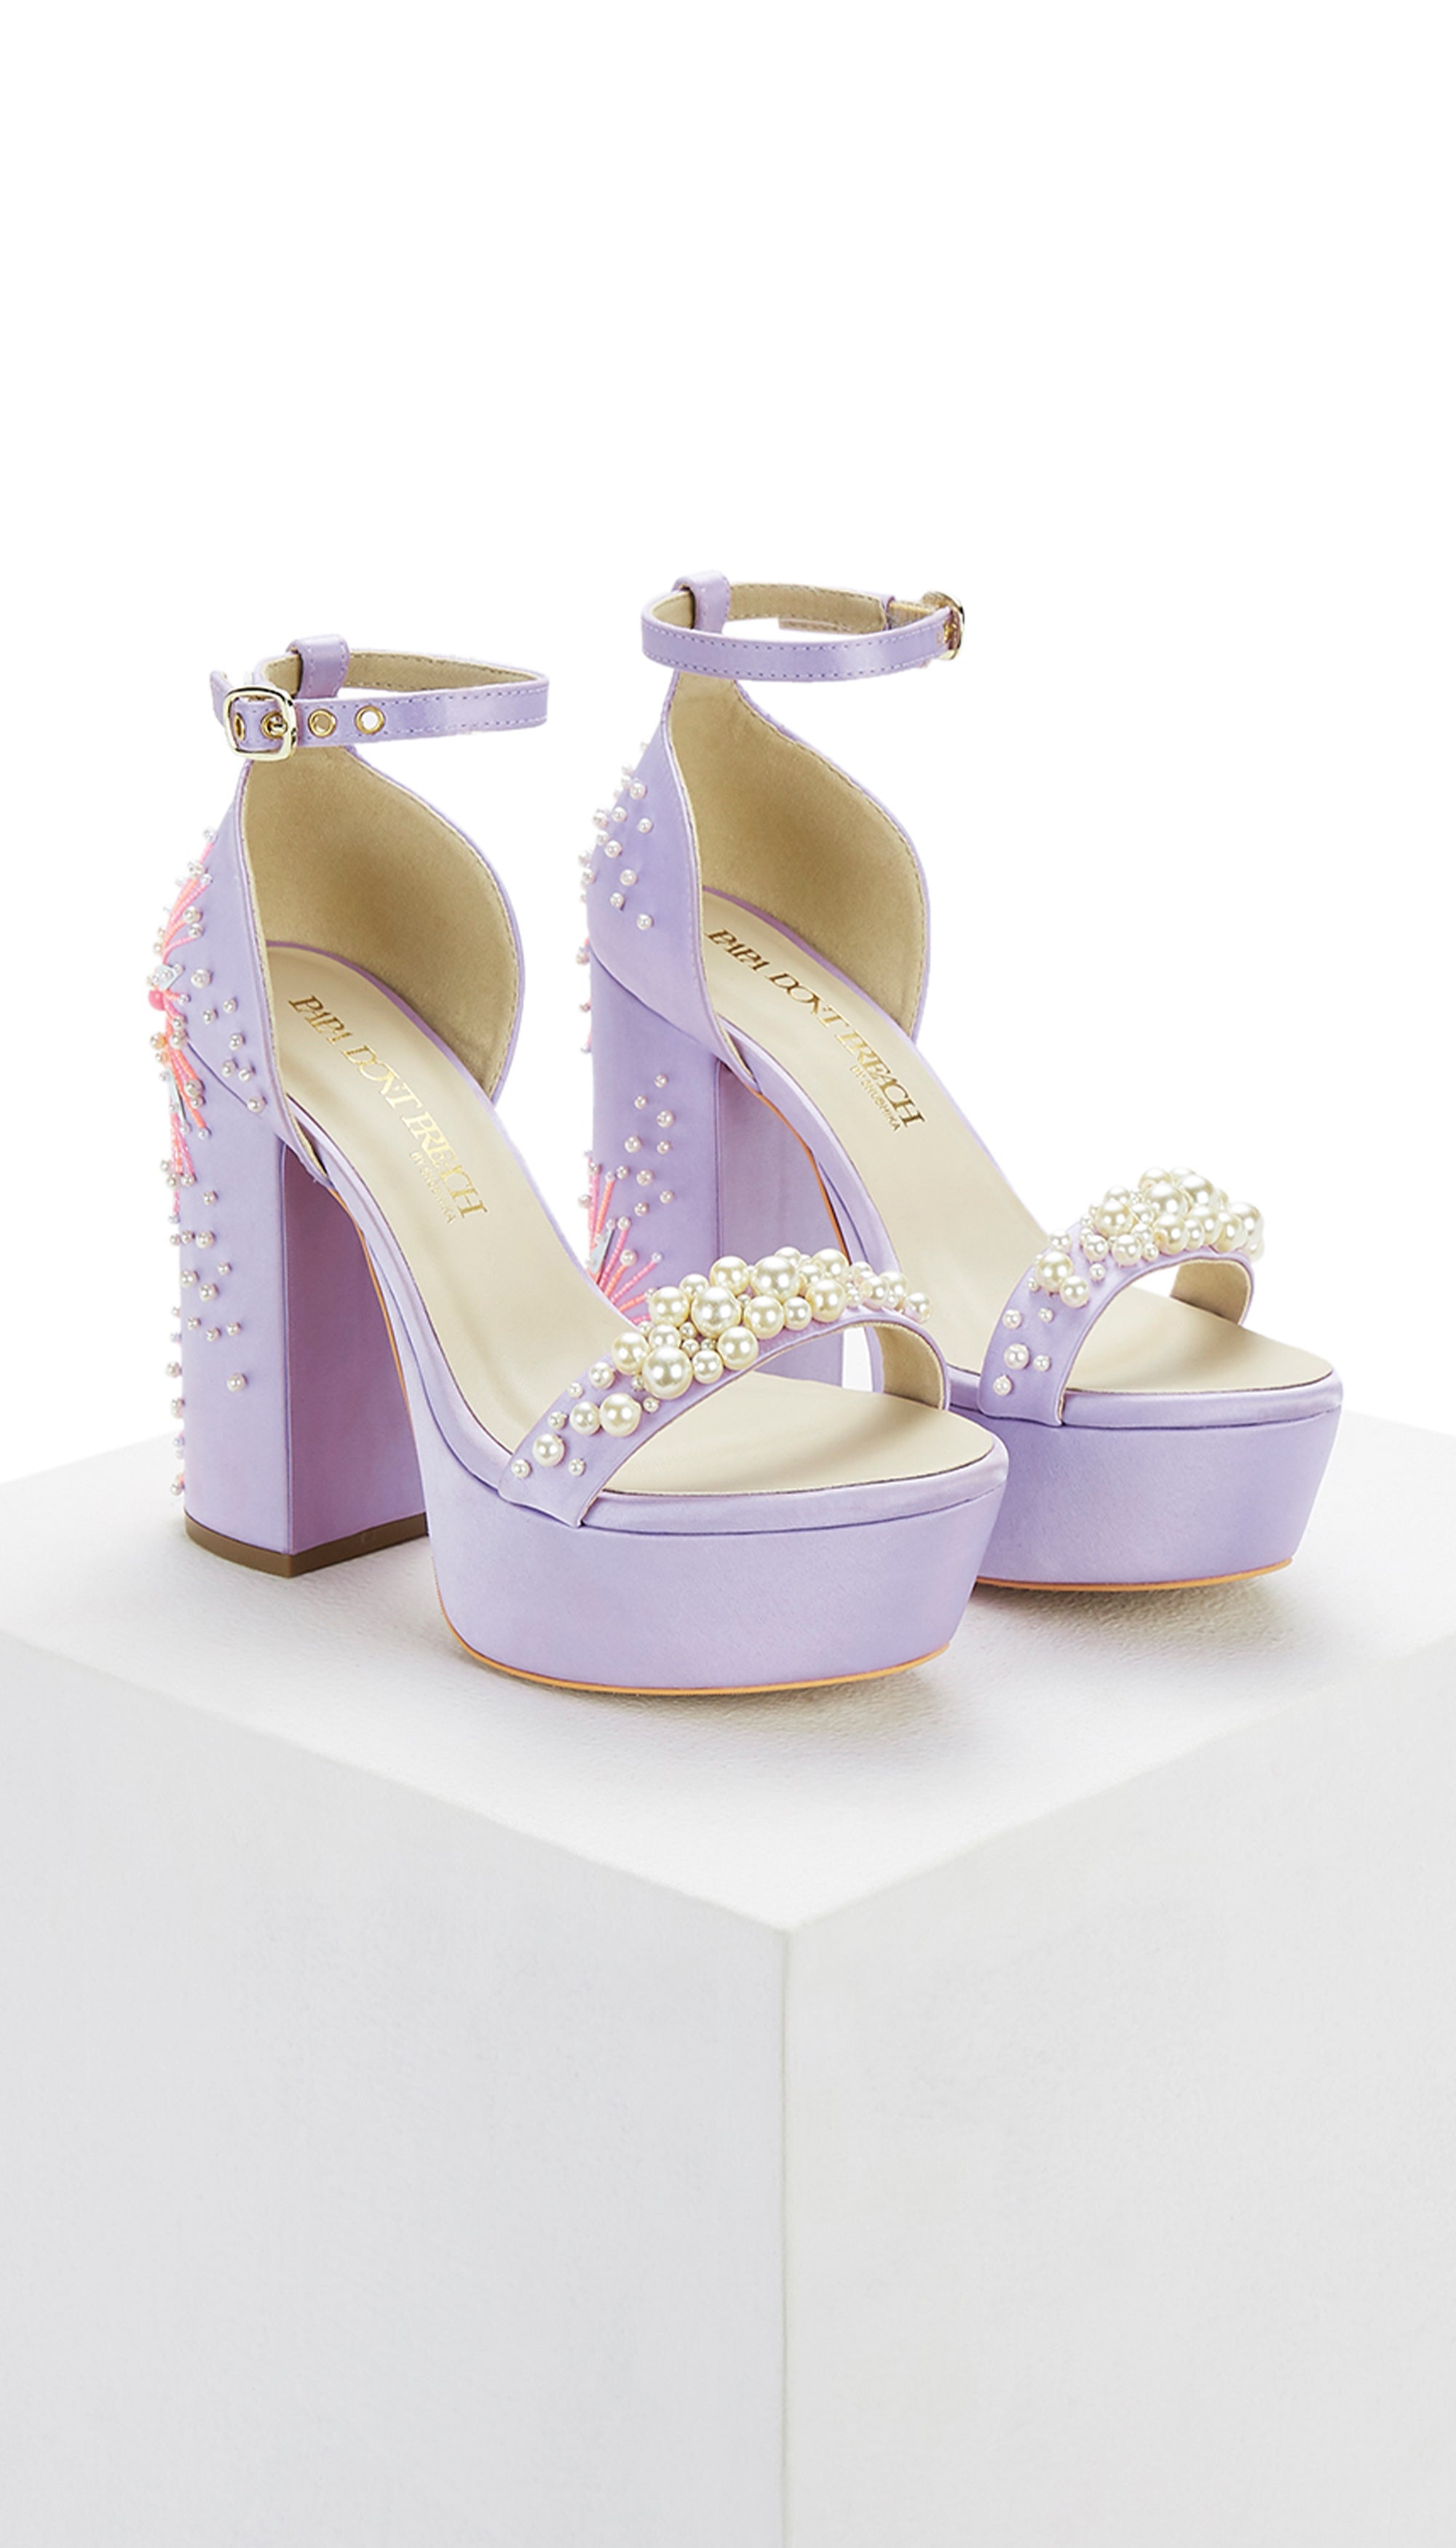 Modest / Simple Lilac Office OL Suede Pumps 2021 7 cm Stiletto Heels  Pointed Toe Pumps High Heels